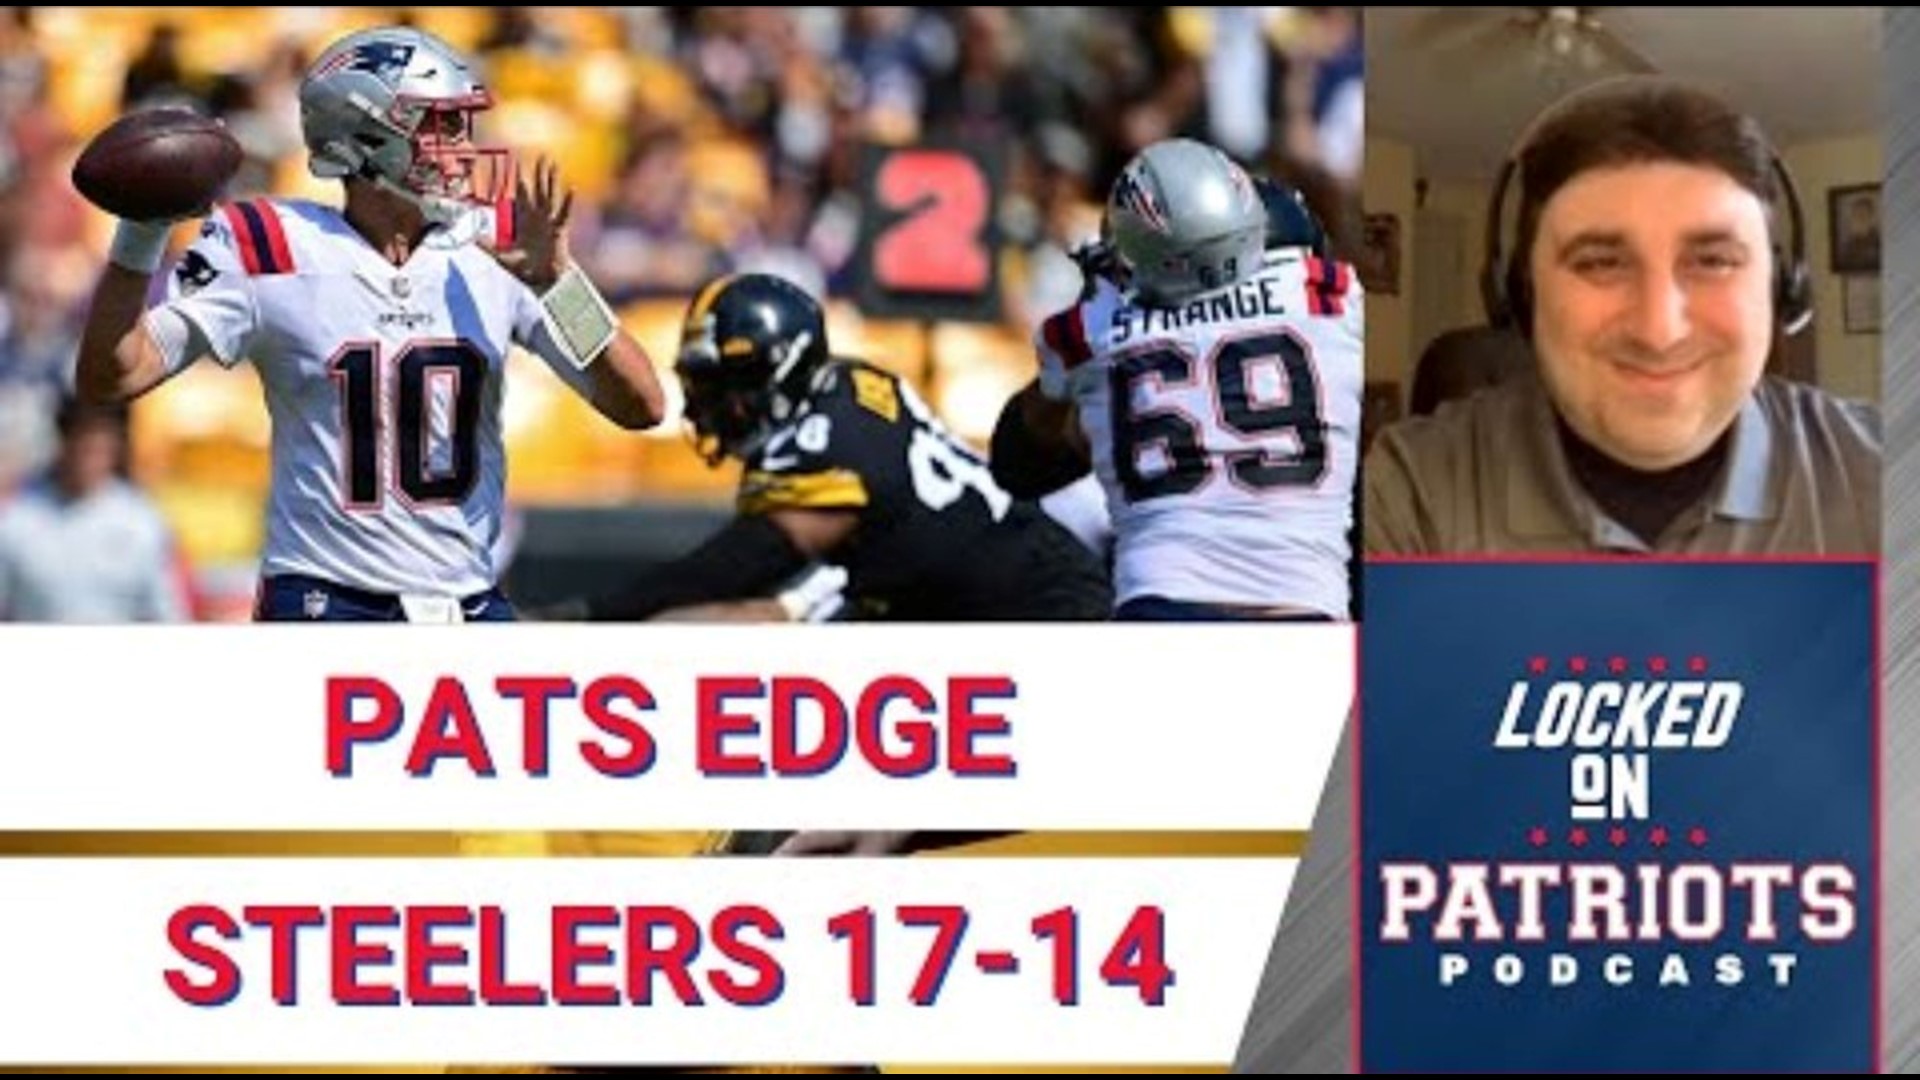 Quarterback Mac Jones threw for 253 yards and a touchdown as the New England Patriots defeated the Pittsburgh Steelers 17-14 on Sunday at Acrisure Stadium.